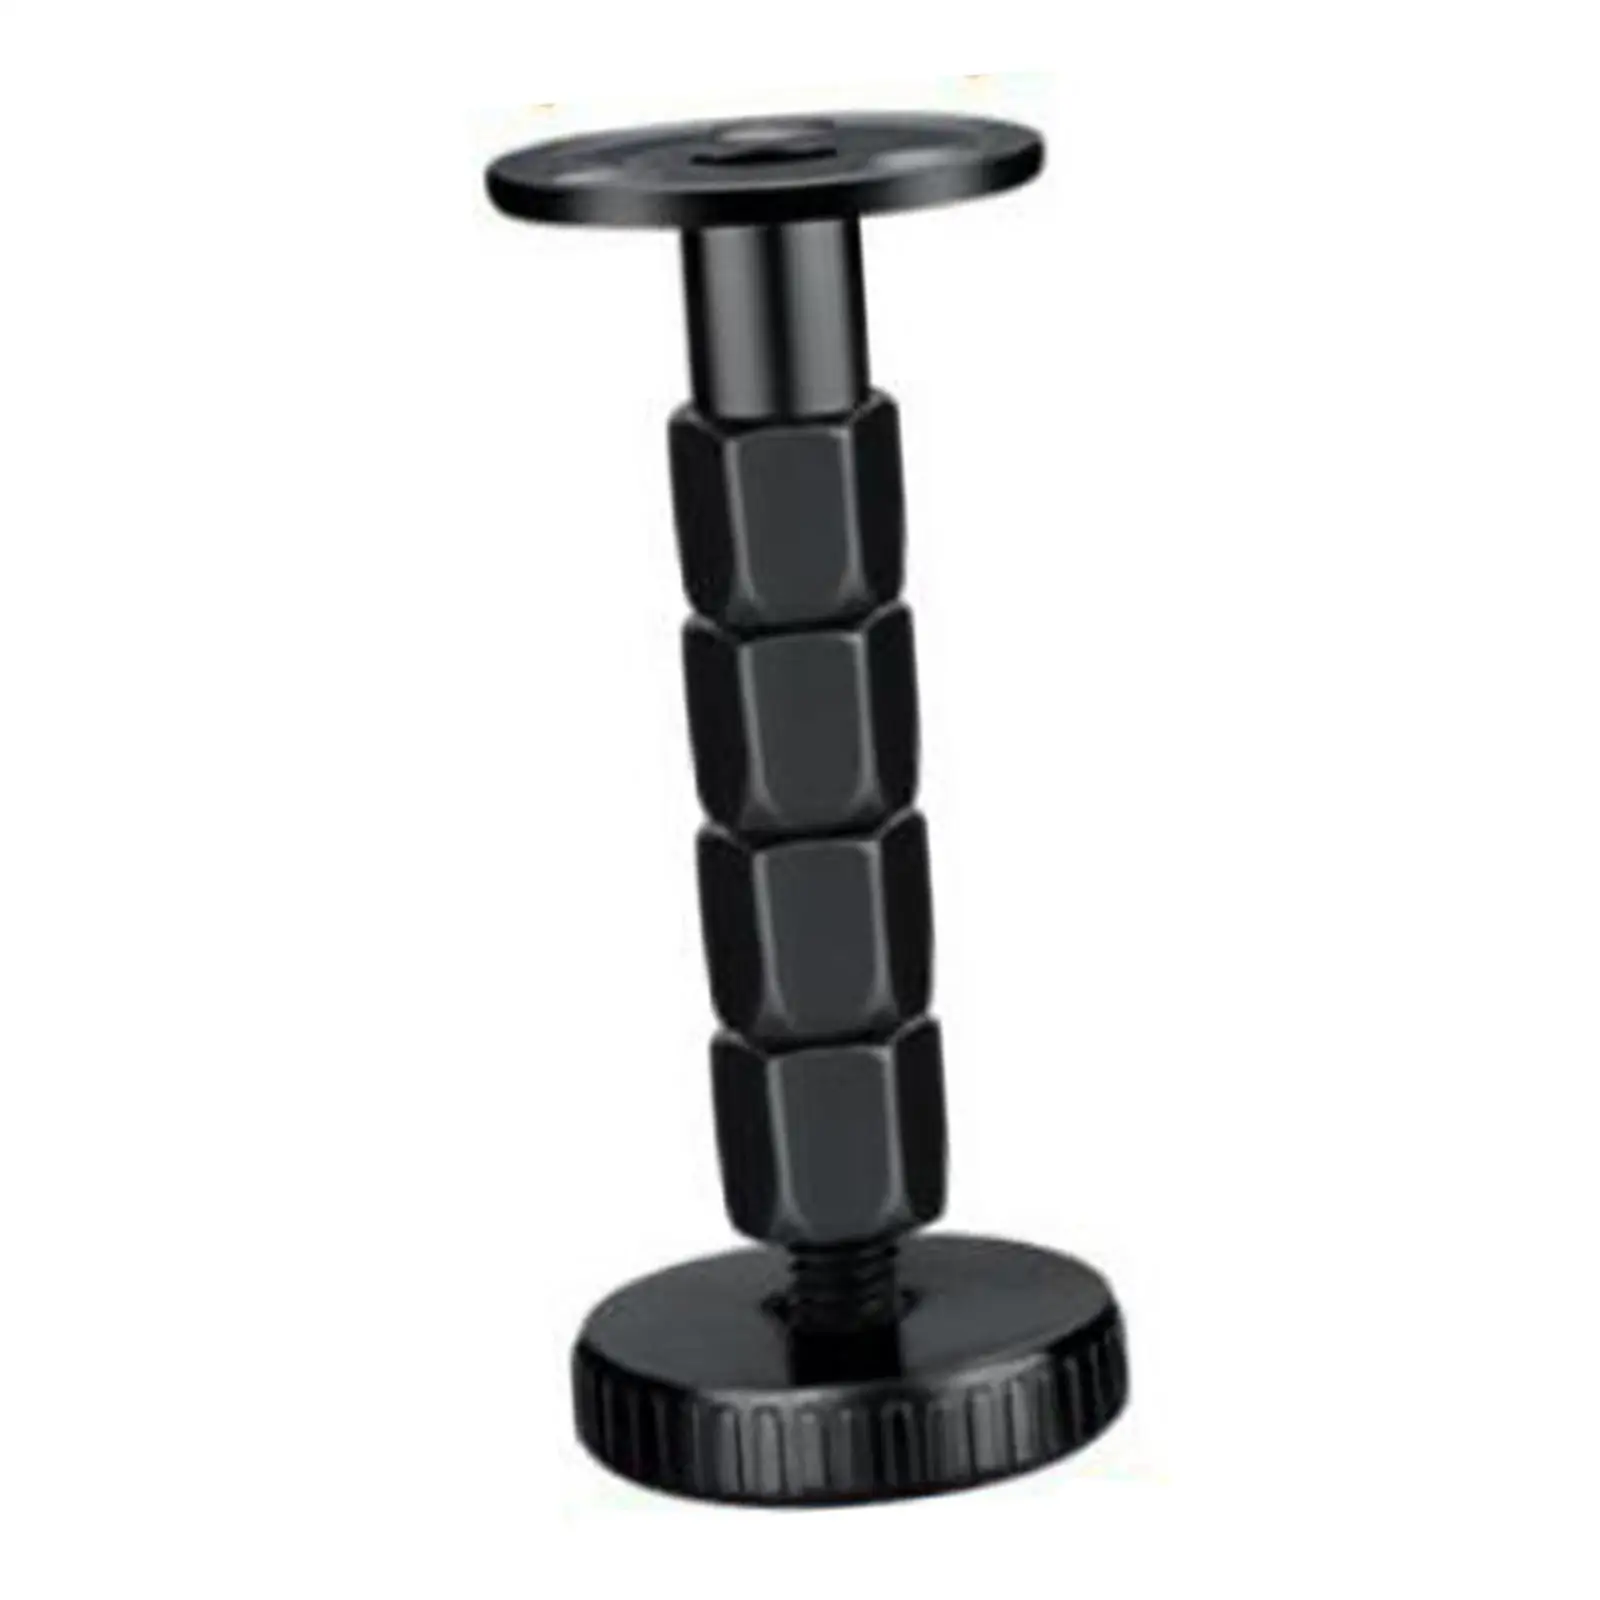 Bedside Fixer Adjustable Threaded Bedside Anti Shaking Tool for Sofas Cabinets